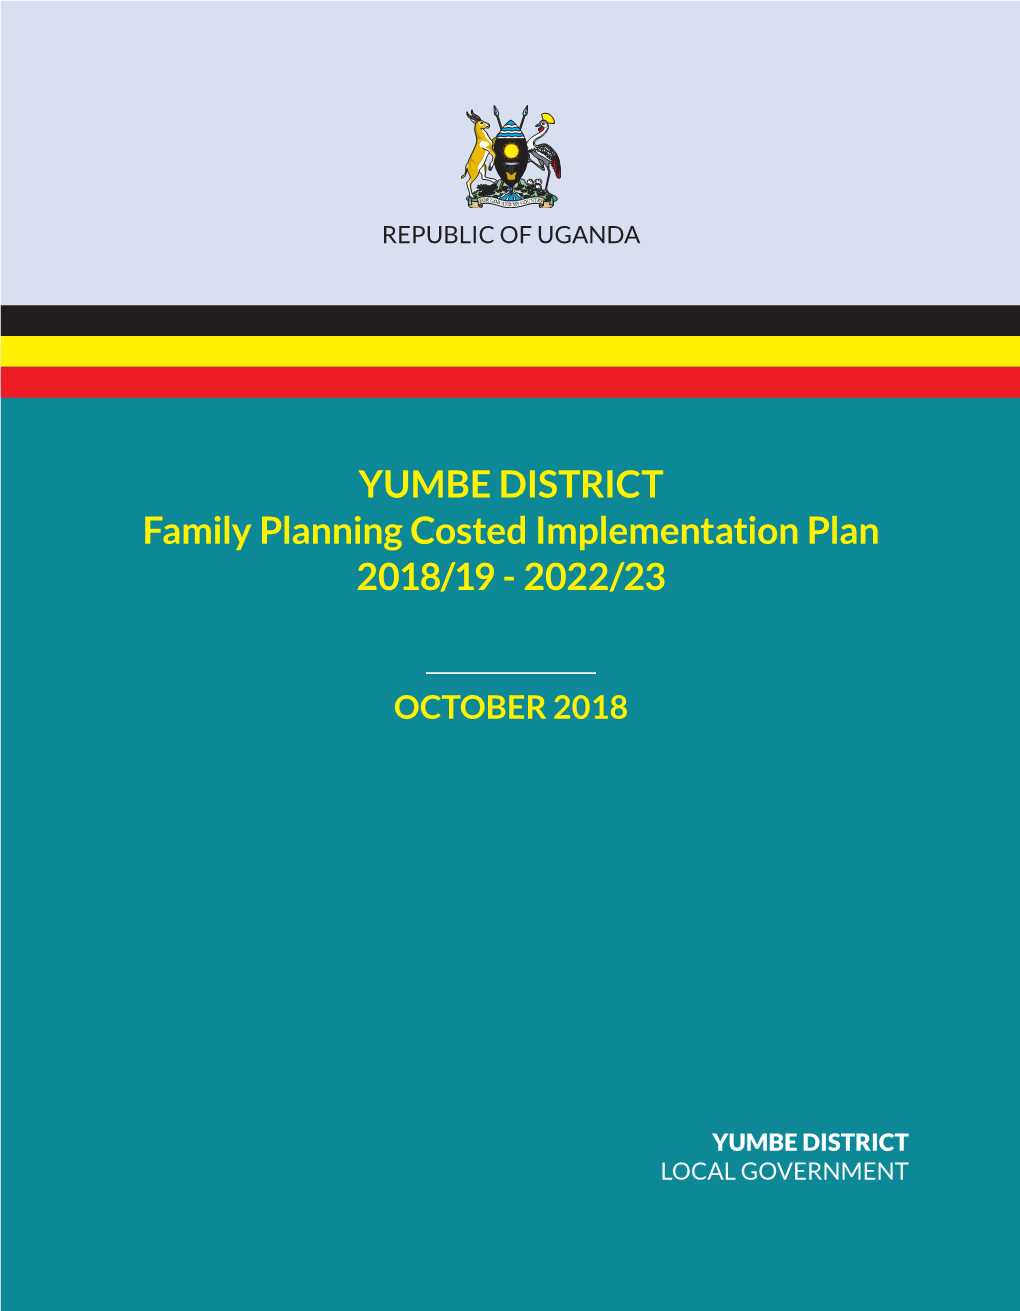 YUMBE DISTRICT Family Planning Costed Implementation Plan 2018/19 - 2022/23